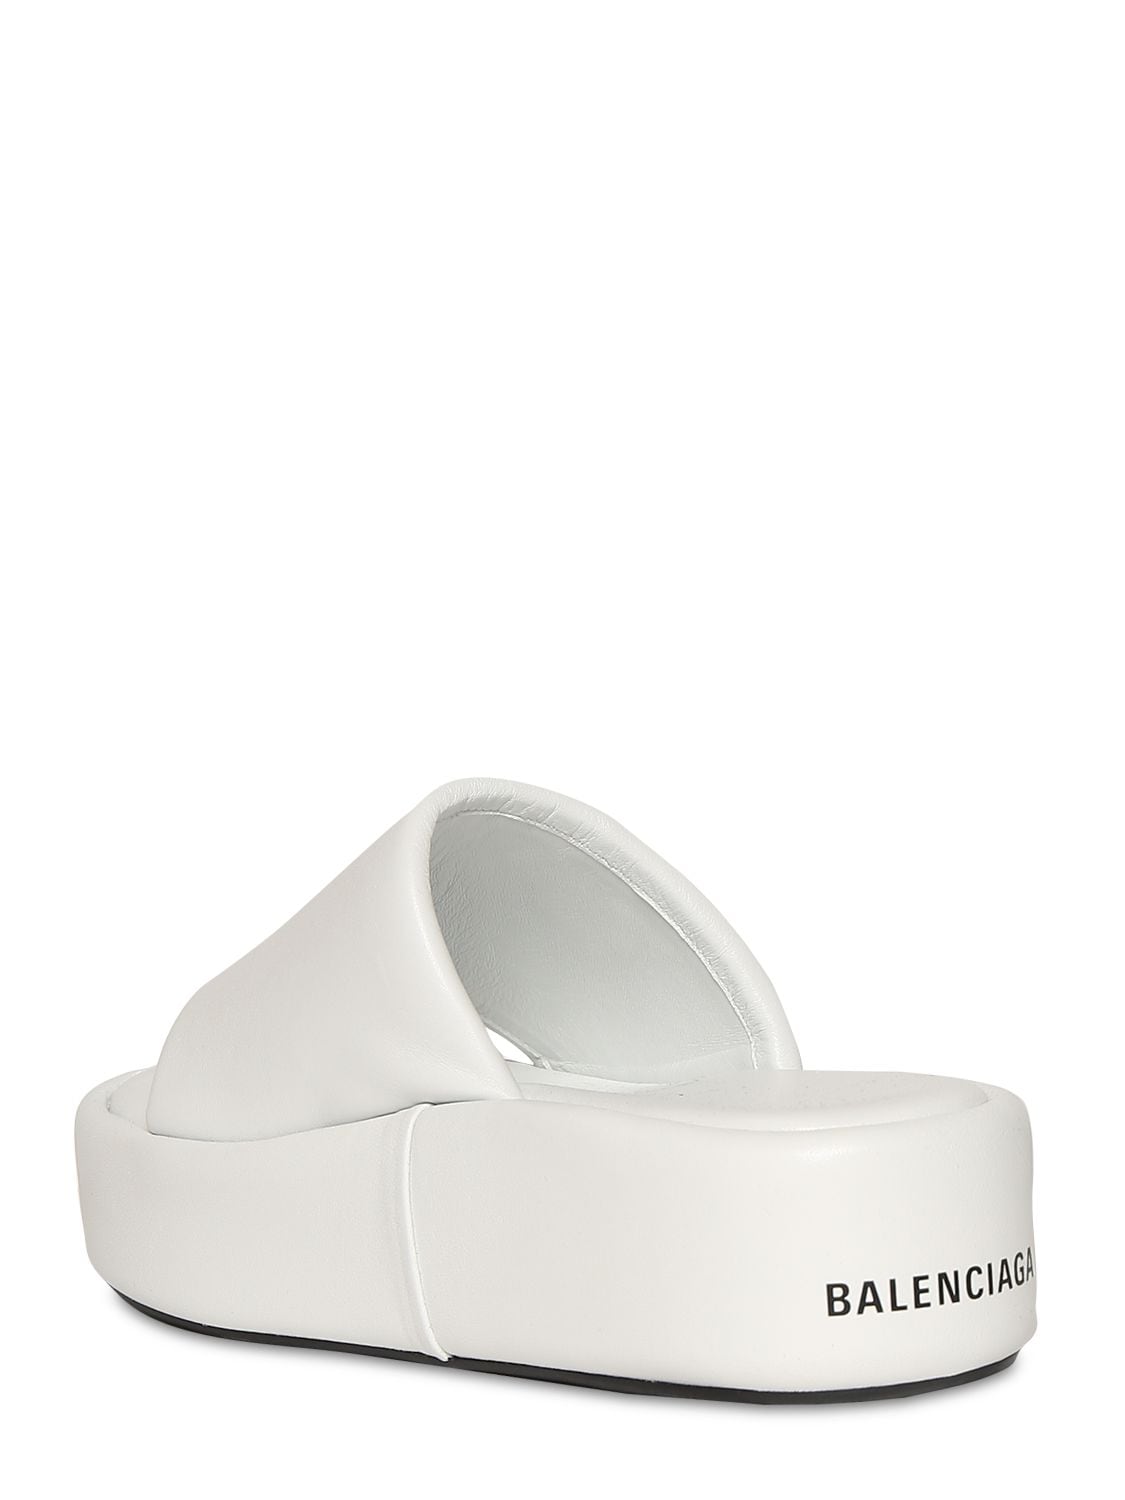 Shop Balenciaga 50mm Rise Leather Wedge Sandals In White